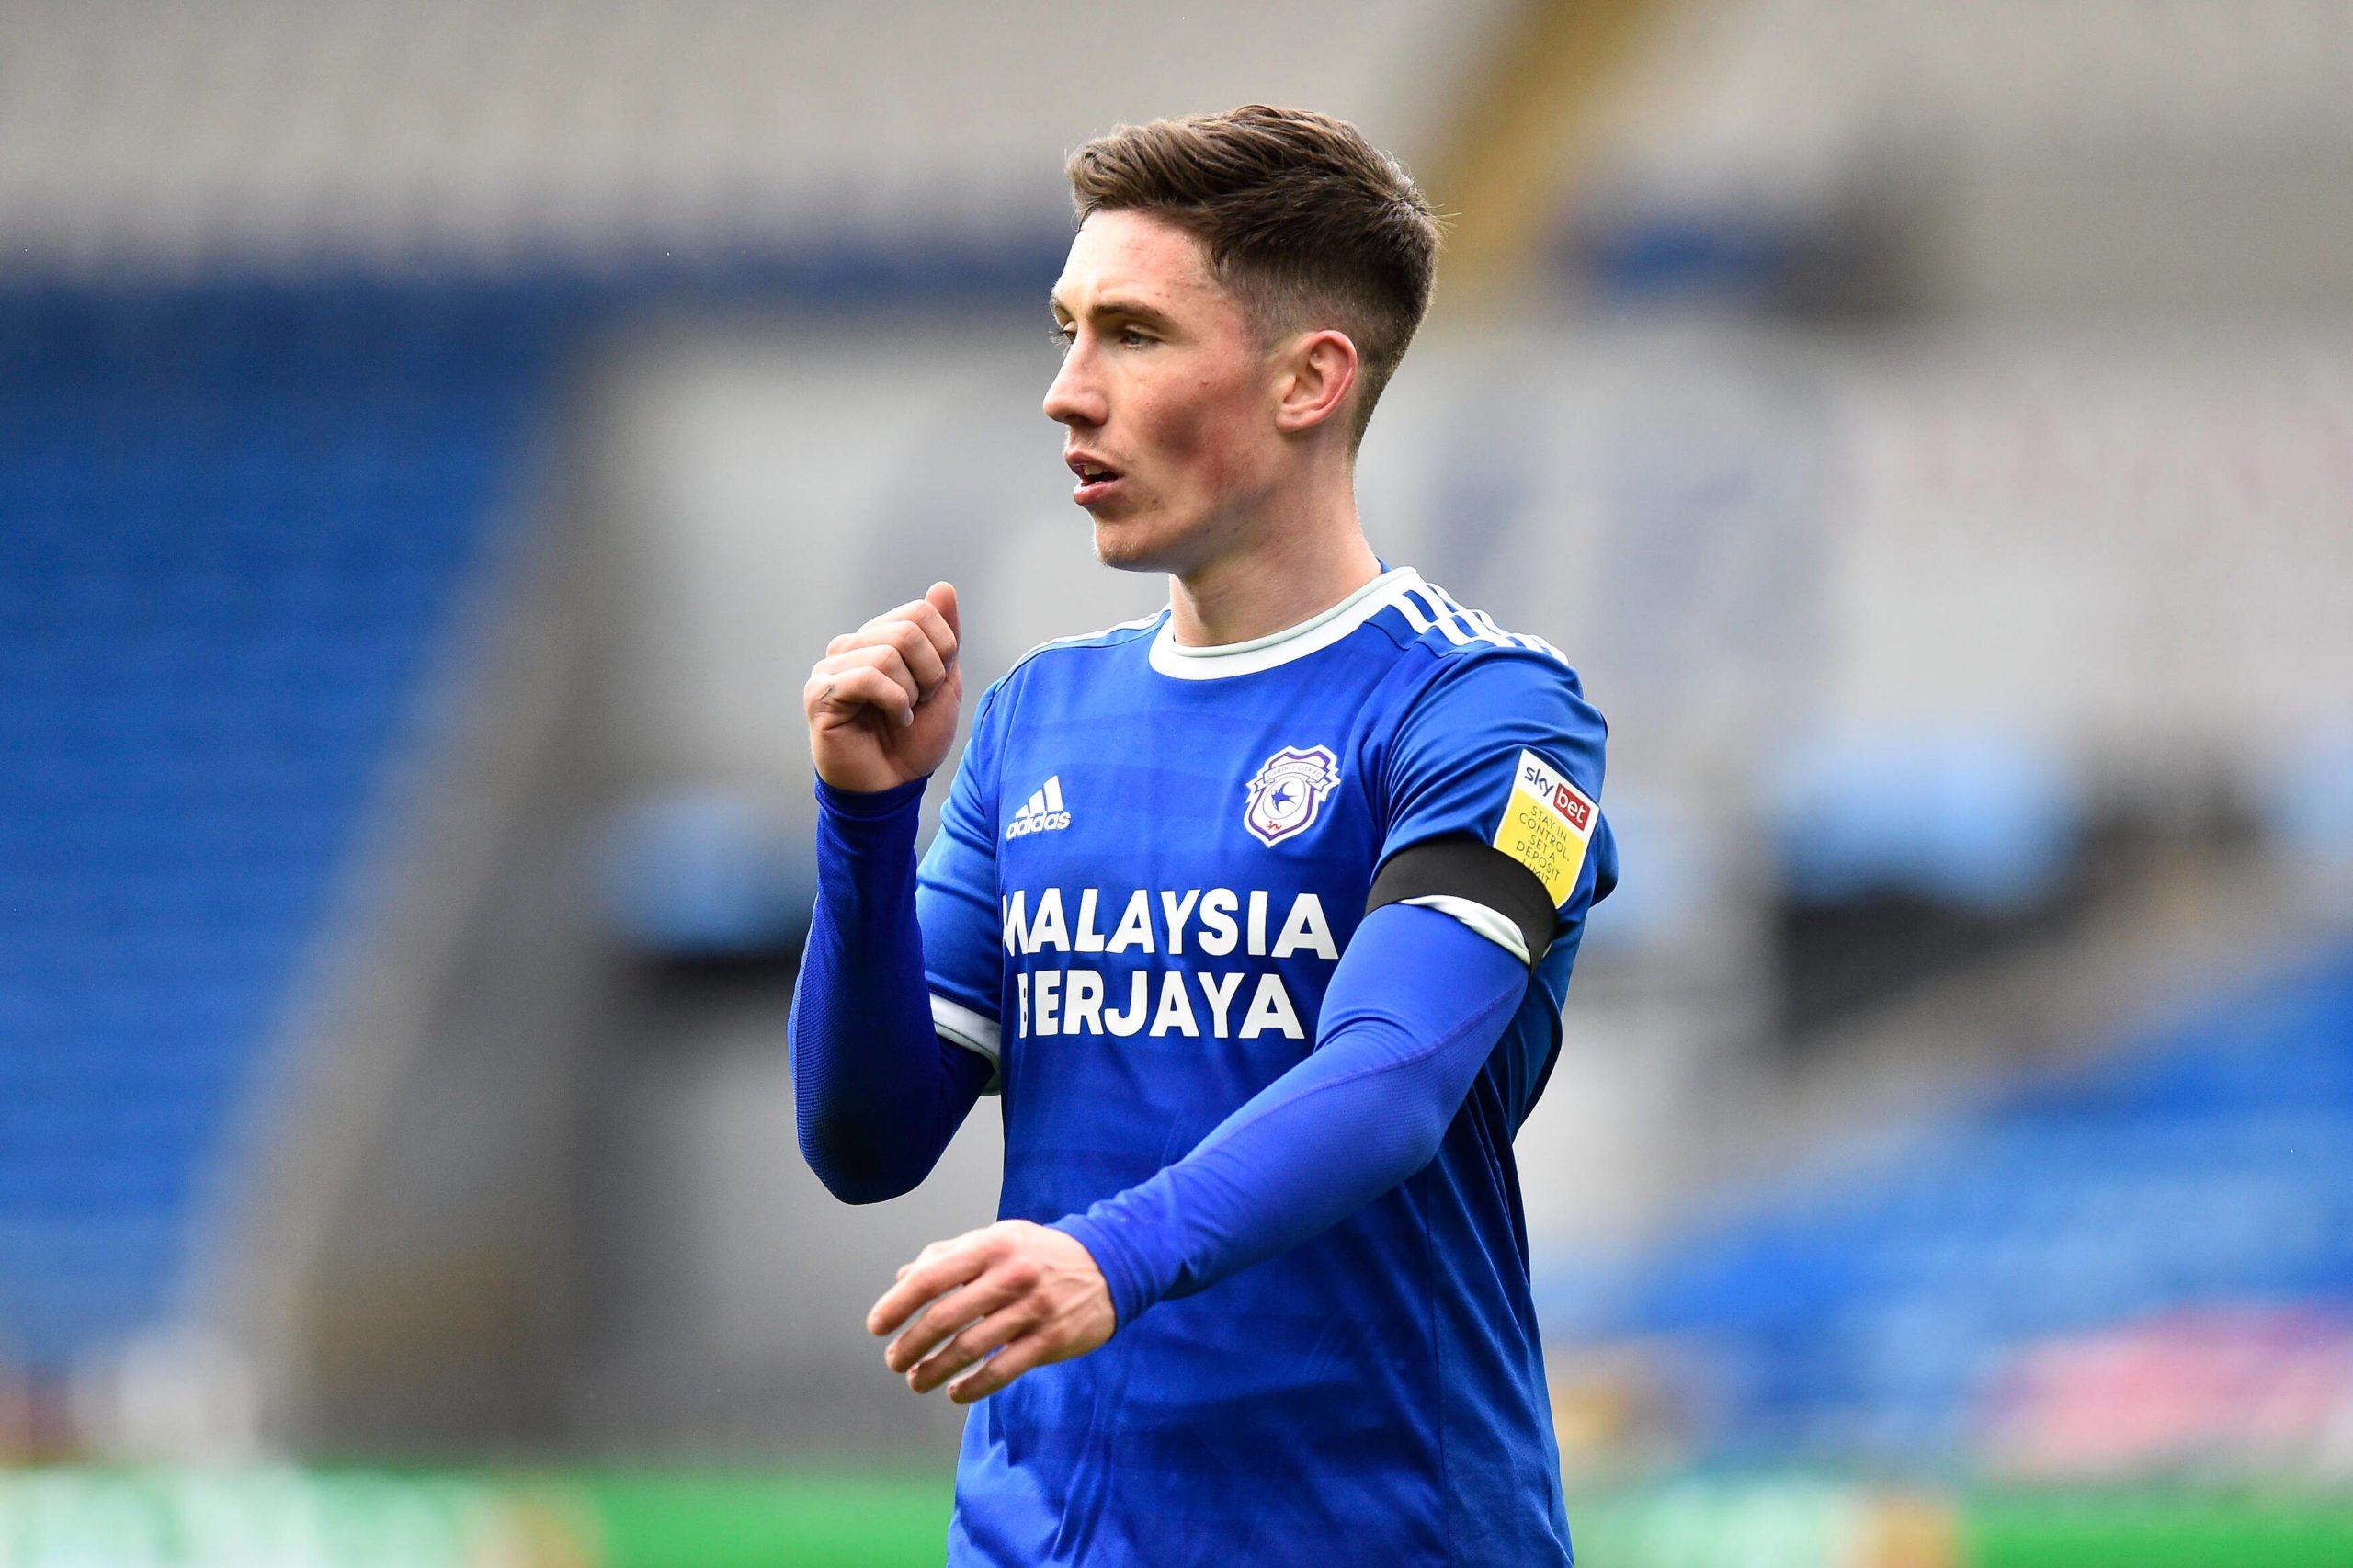 Liverpool's Harry Wilson agree to Fulham (Wilson is seen in the photo)